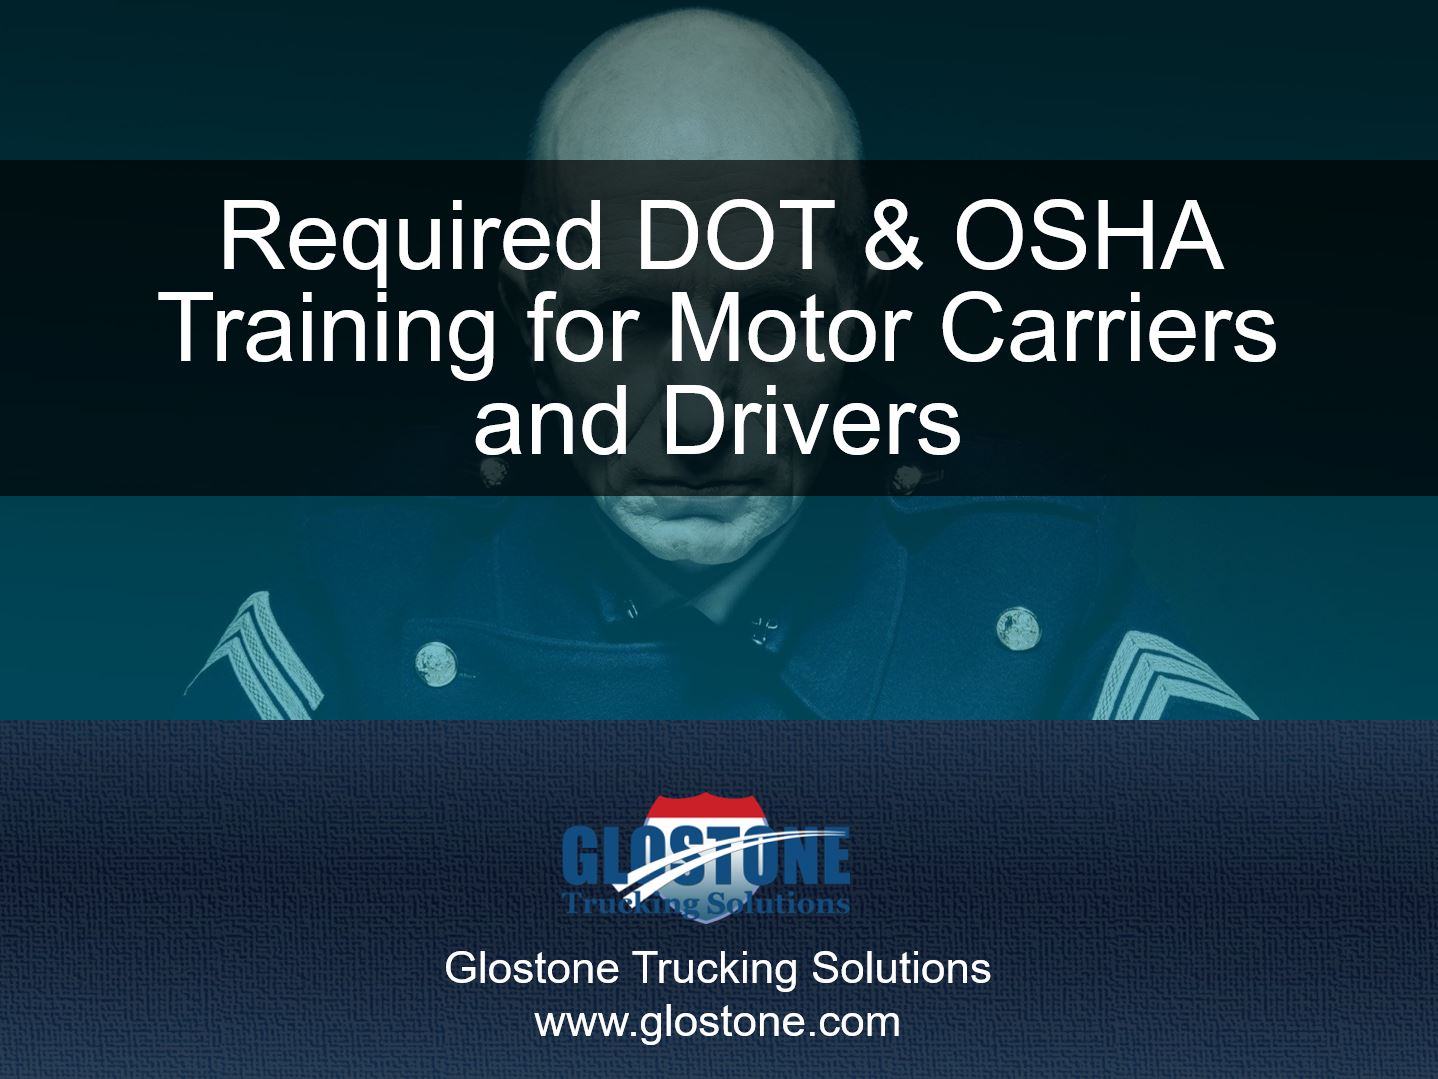 August 2018 webinar: Required DOT & OSHA Training for Motor Carriers and Drivers